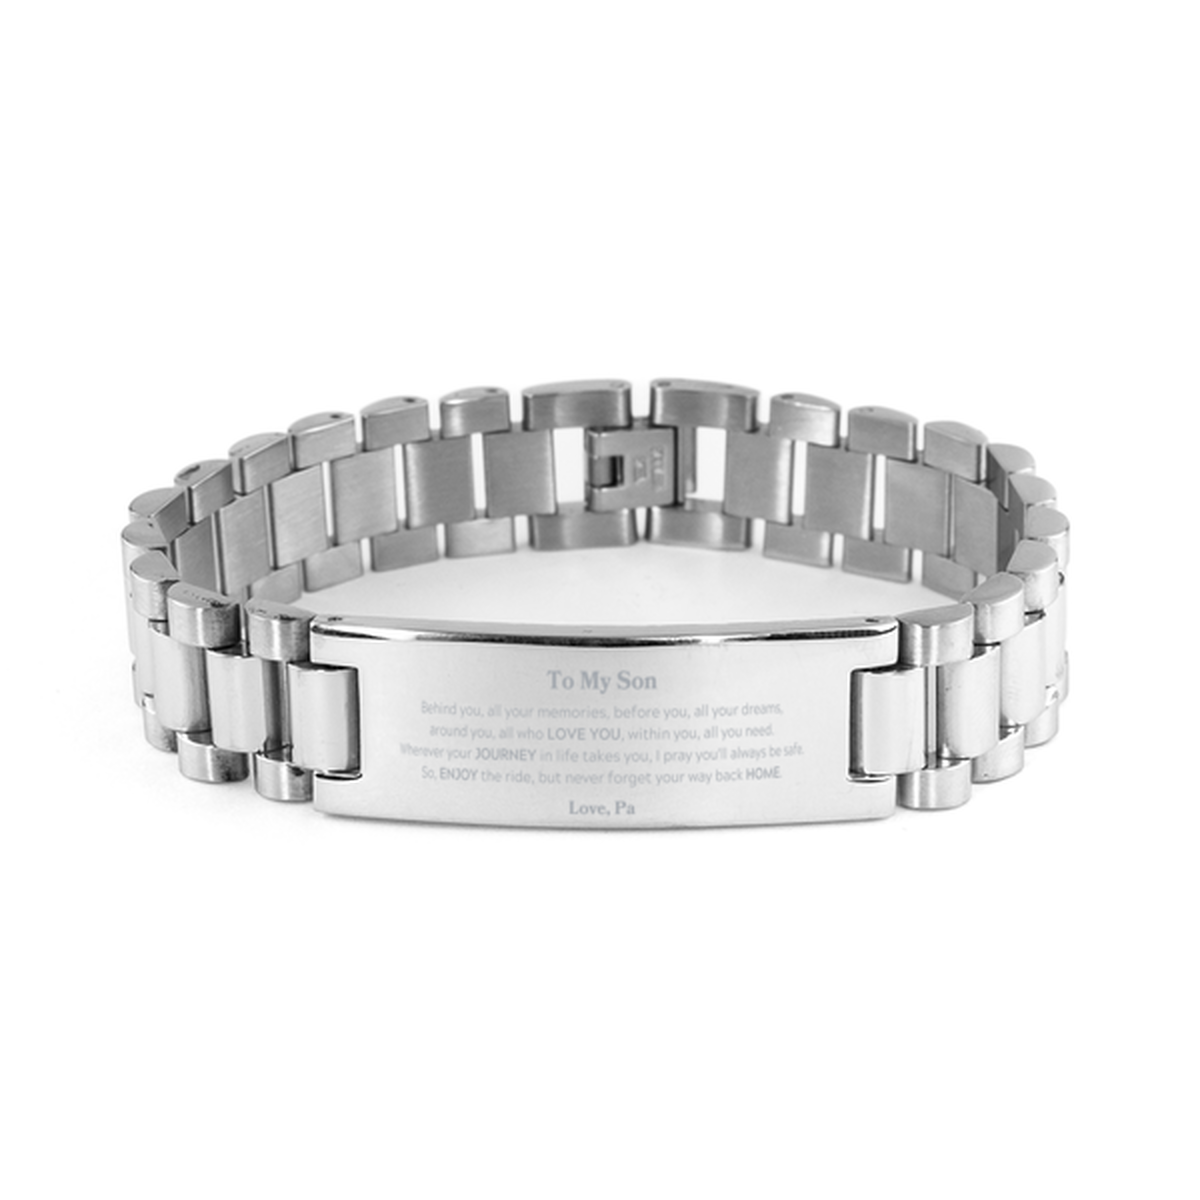 To My Son Graduation Gifts from Pa, Son Ladder Stainless Steel Bracelet Christmas Birthday Gifts for Son Behind you, all your memories, before you, all your dreams. Love, Pa